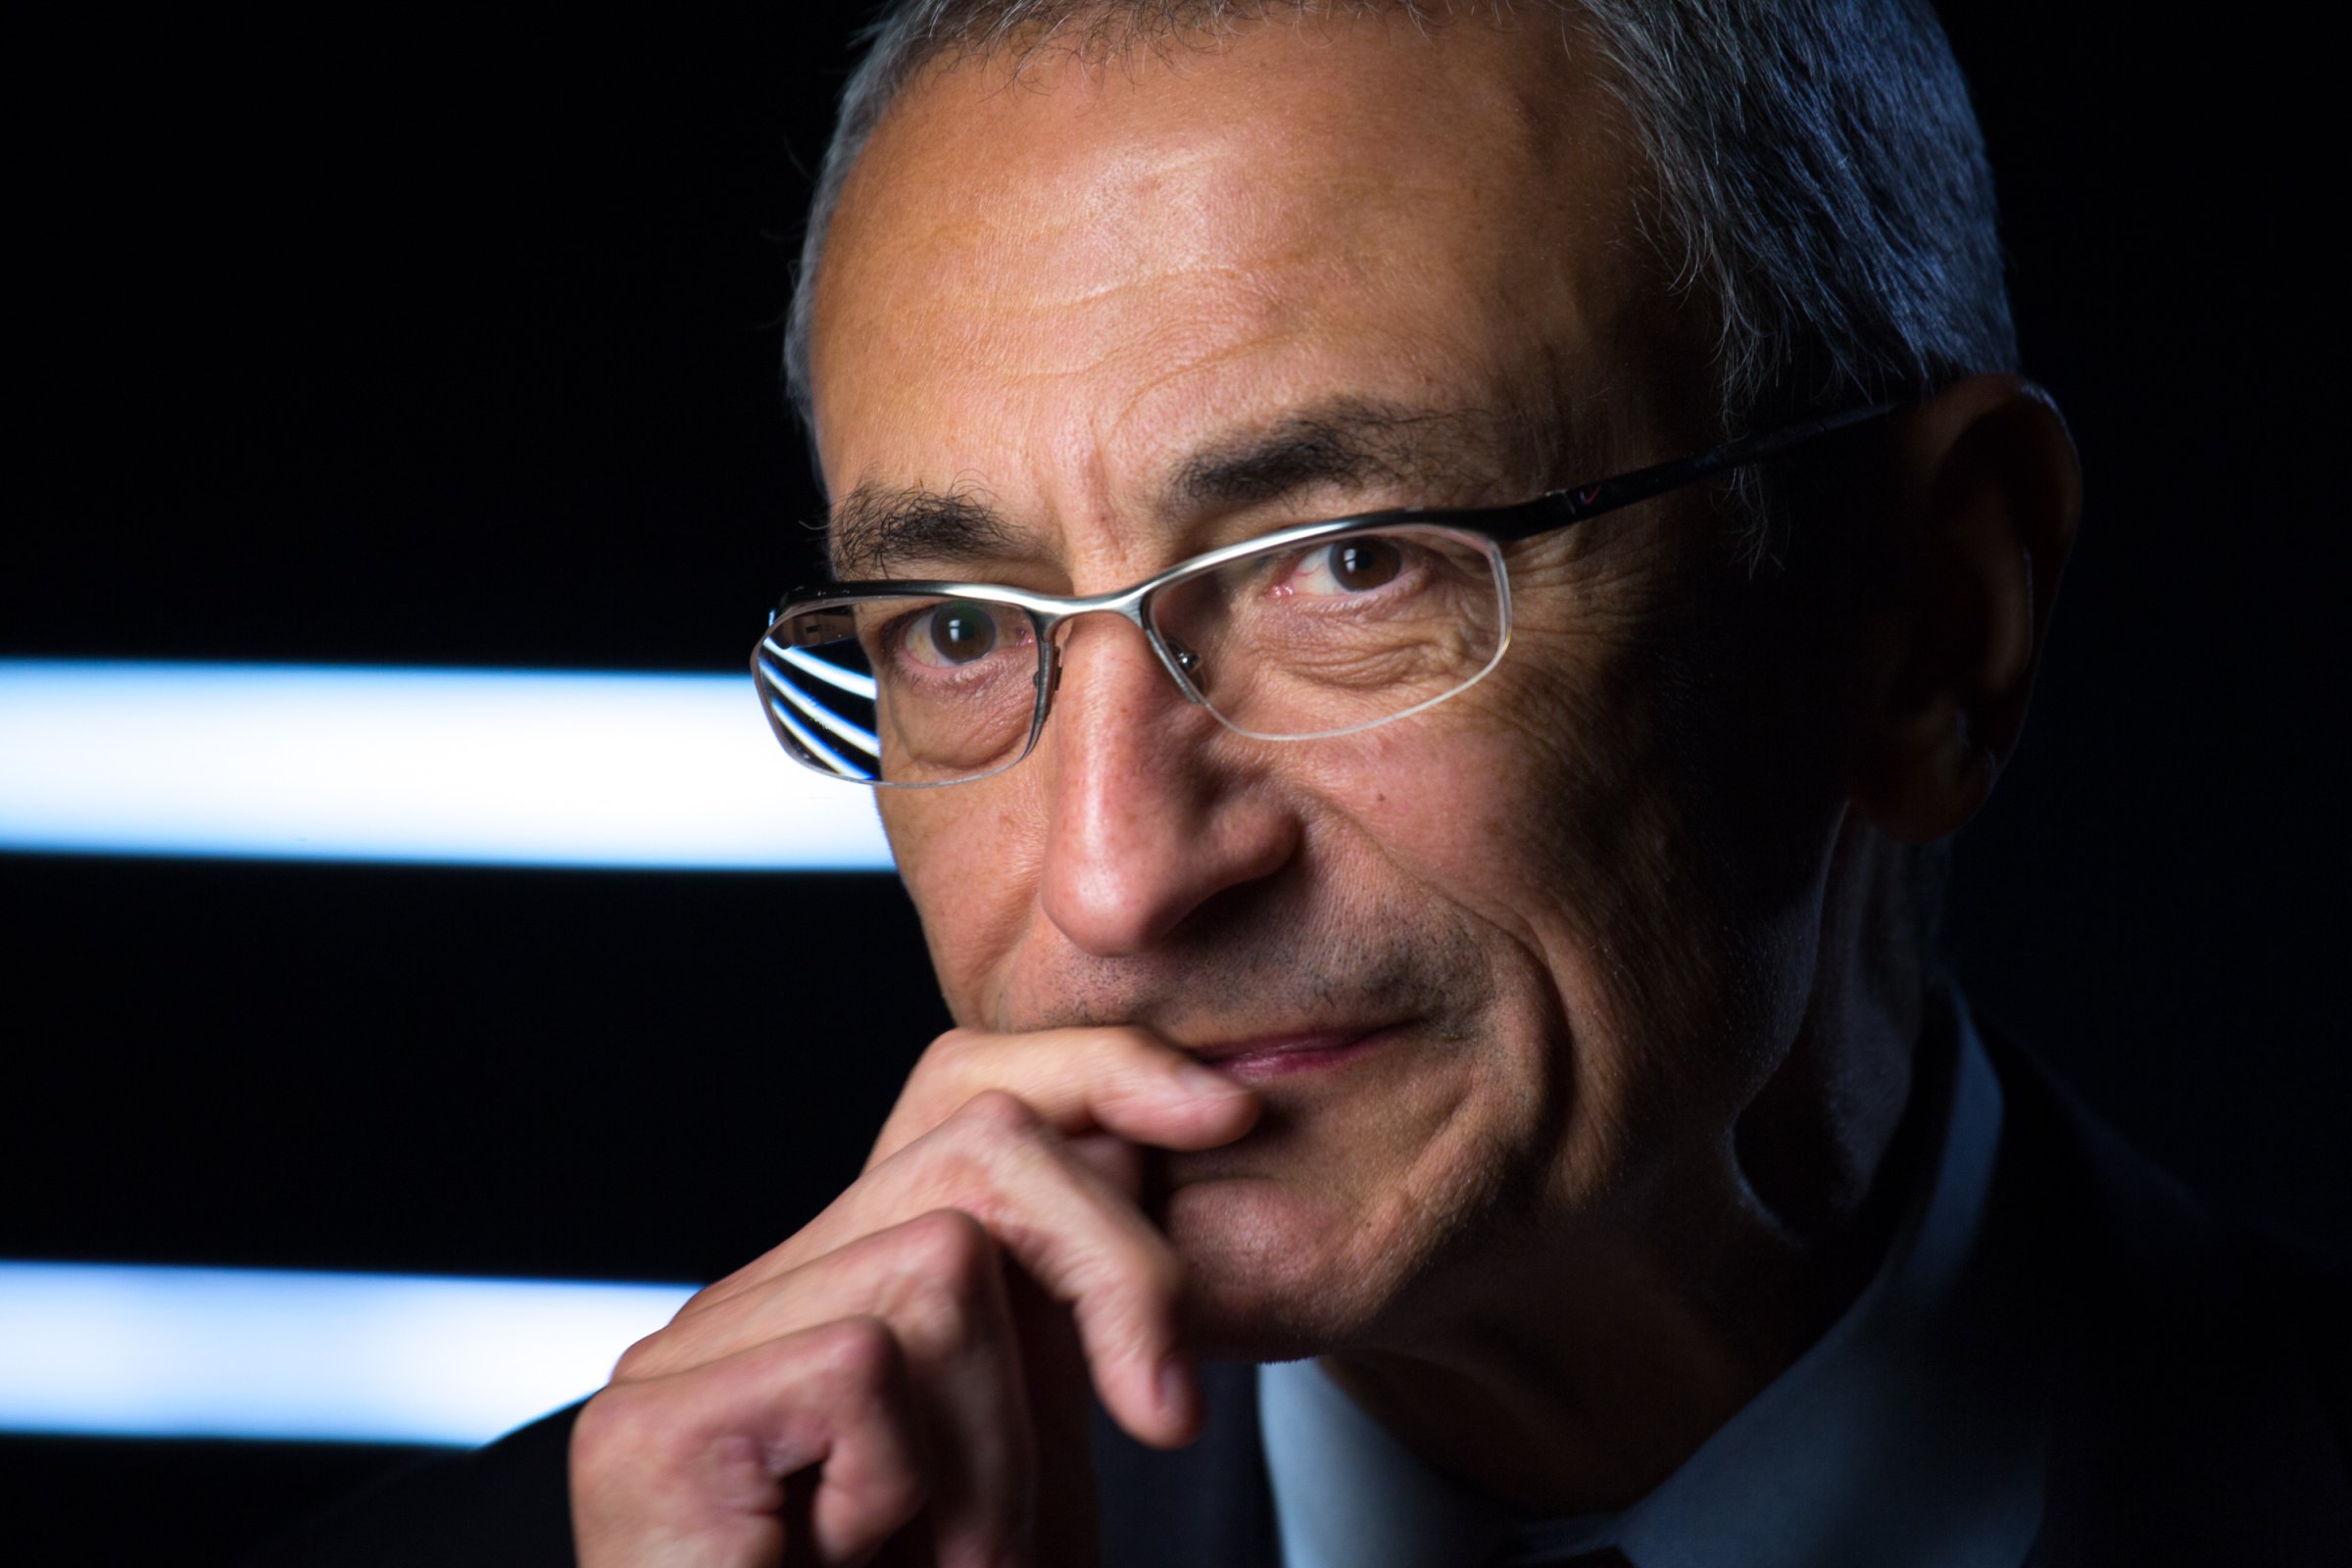 Former Clinton White House Chief of Staff John Podesta is interviewed on Nov. 9, 2012, in Washington.